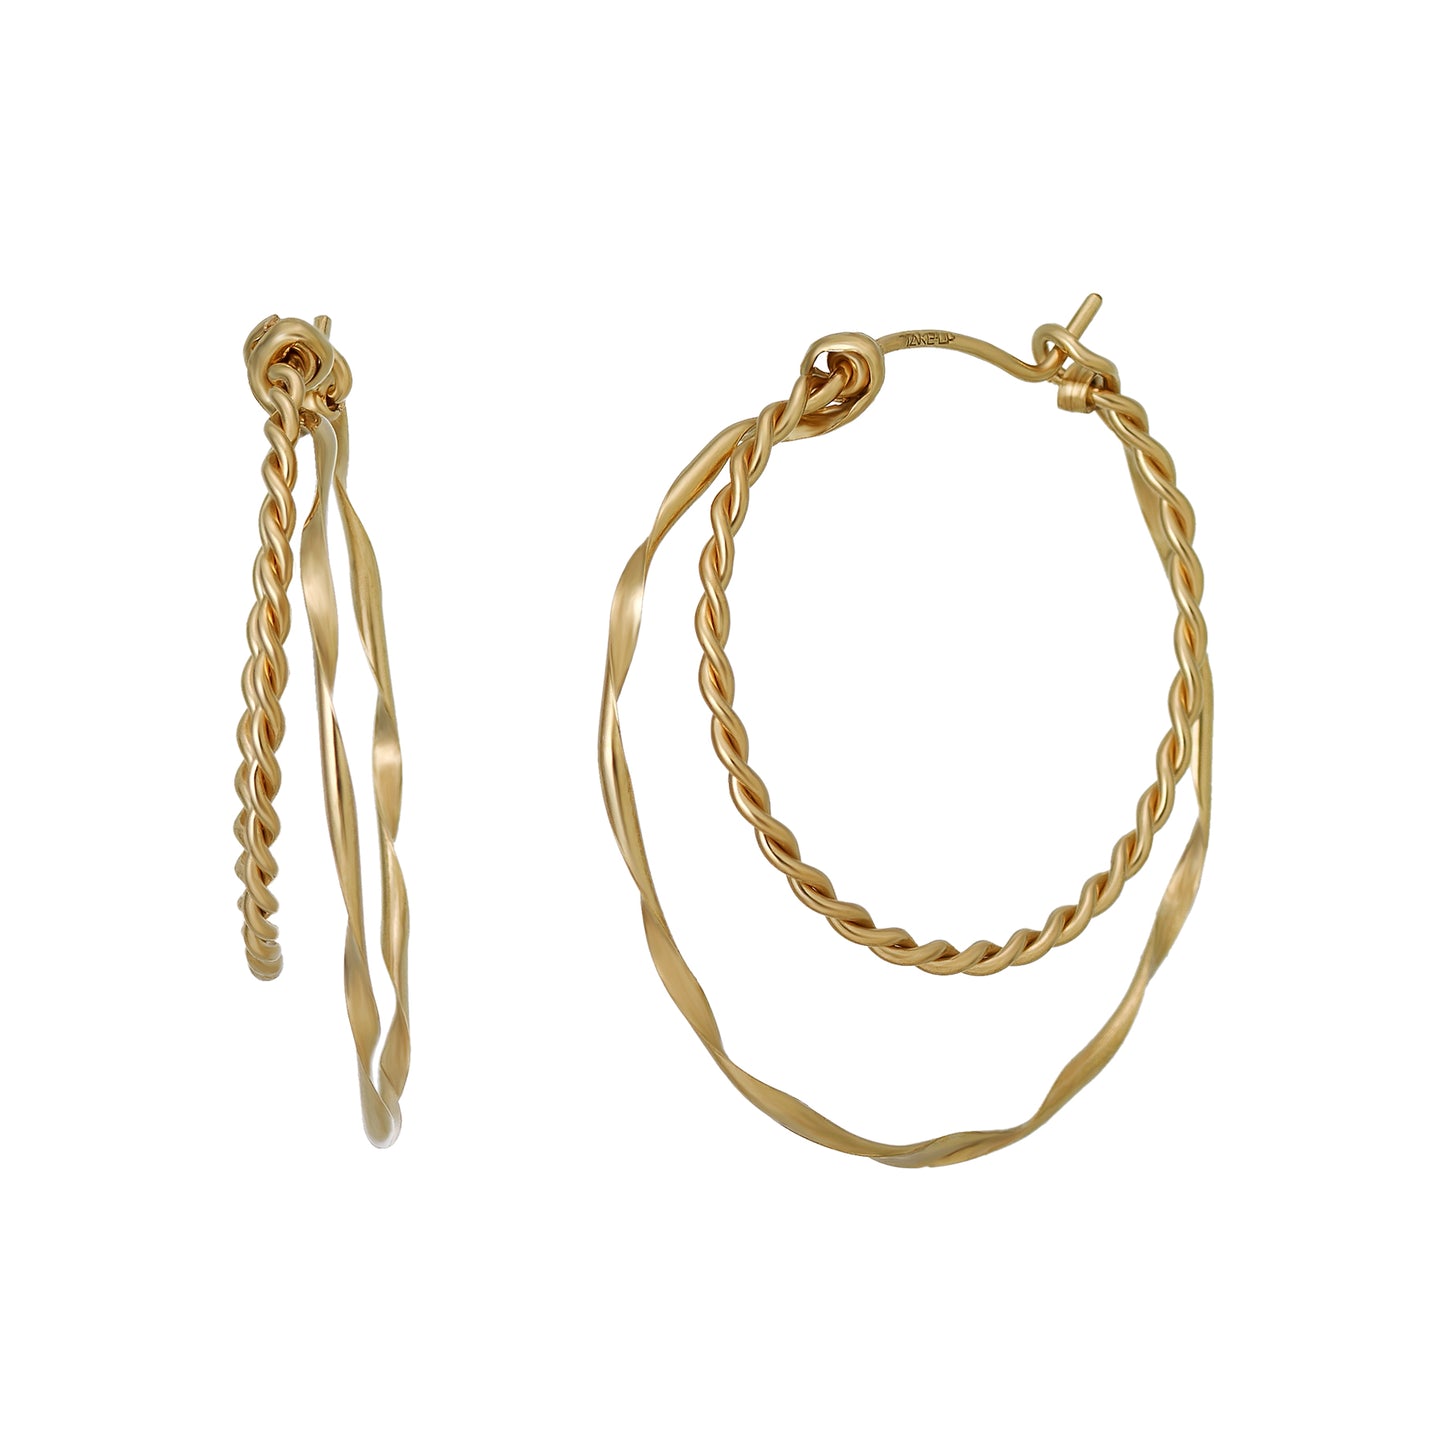 Gold Filled Twisted Double Hoop Earrings - Product Image